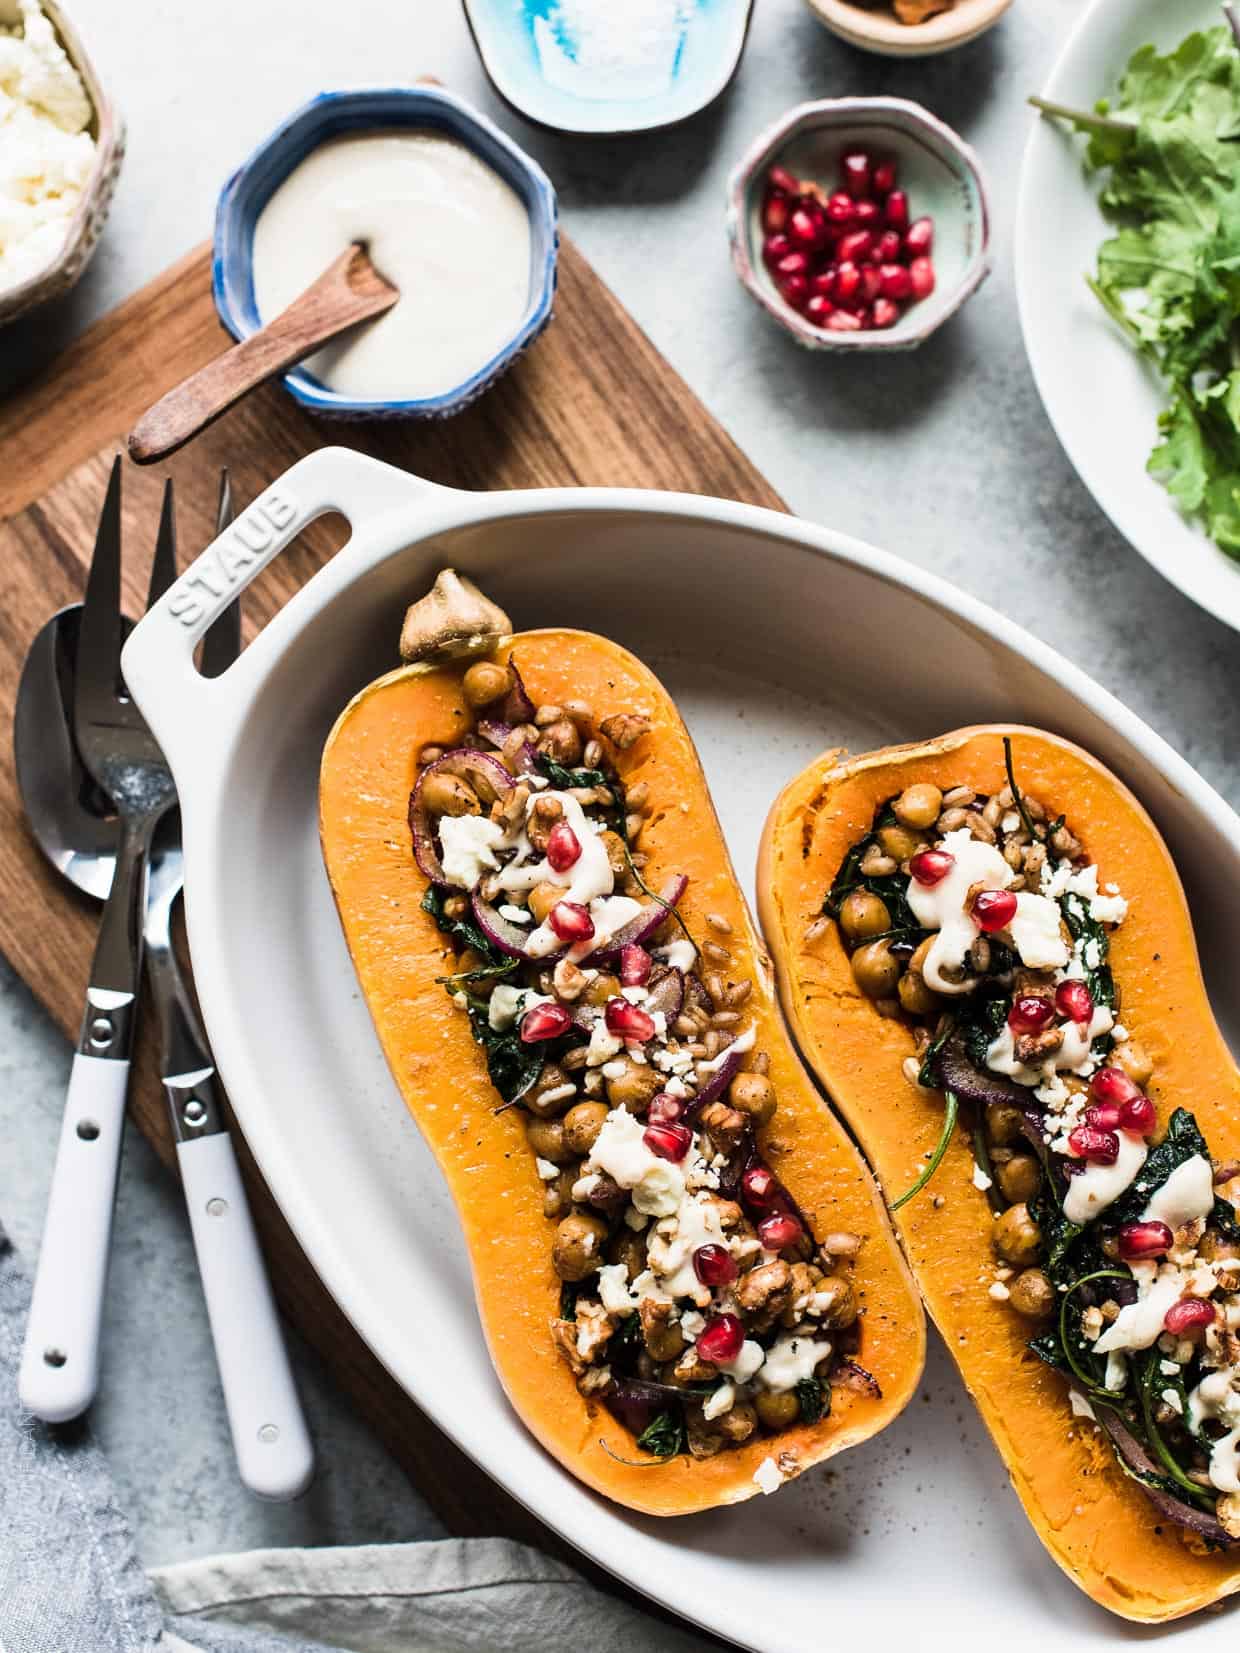 Stuffed Butternut Squash halved and prepared with a filling of chickpeas, baby kale, red onion, feta, and more.